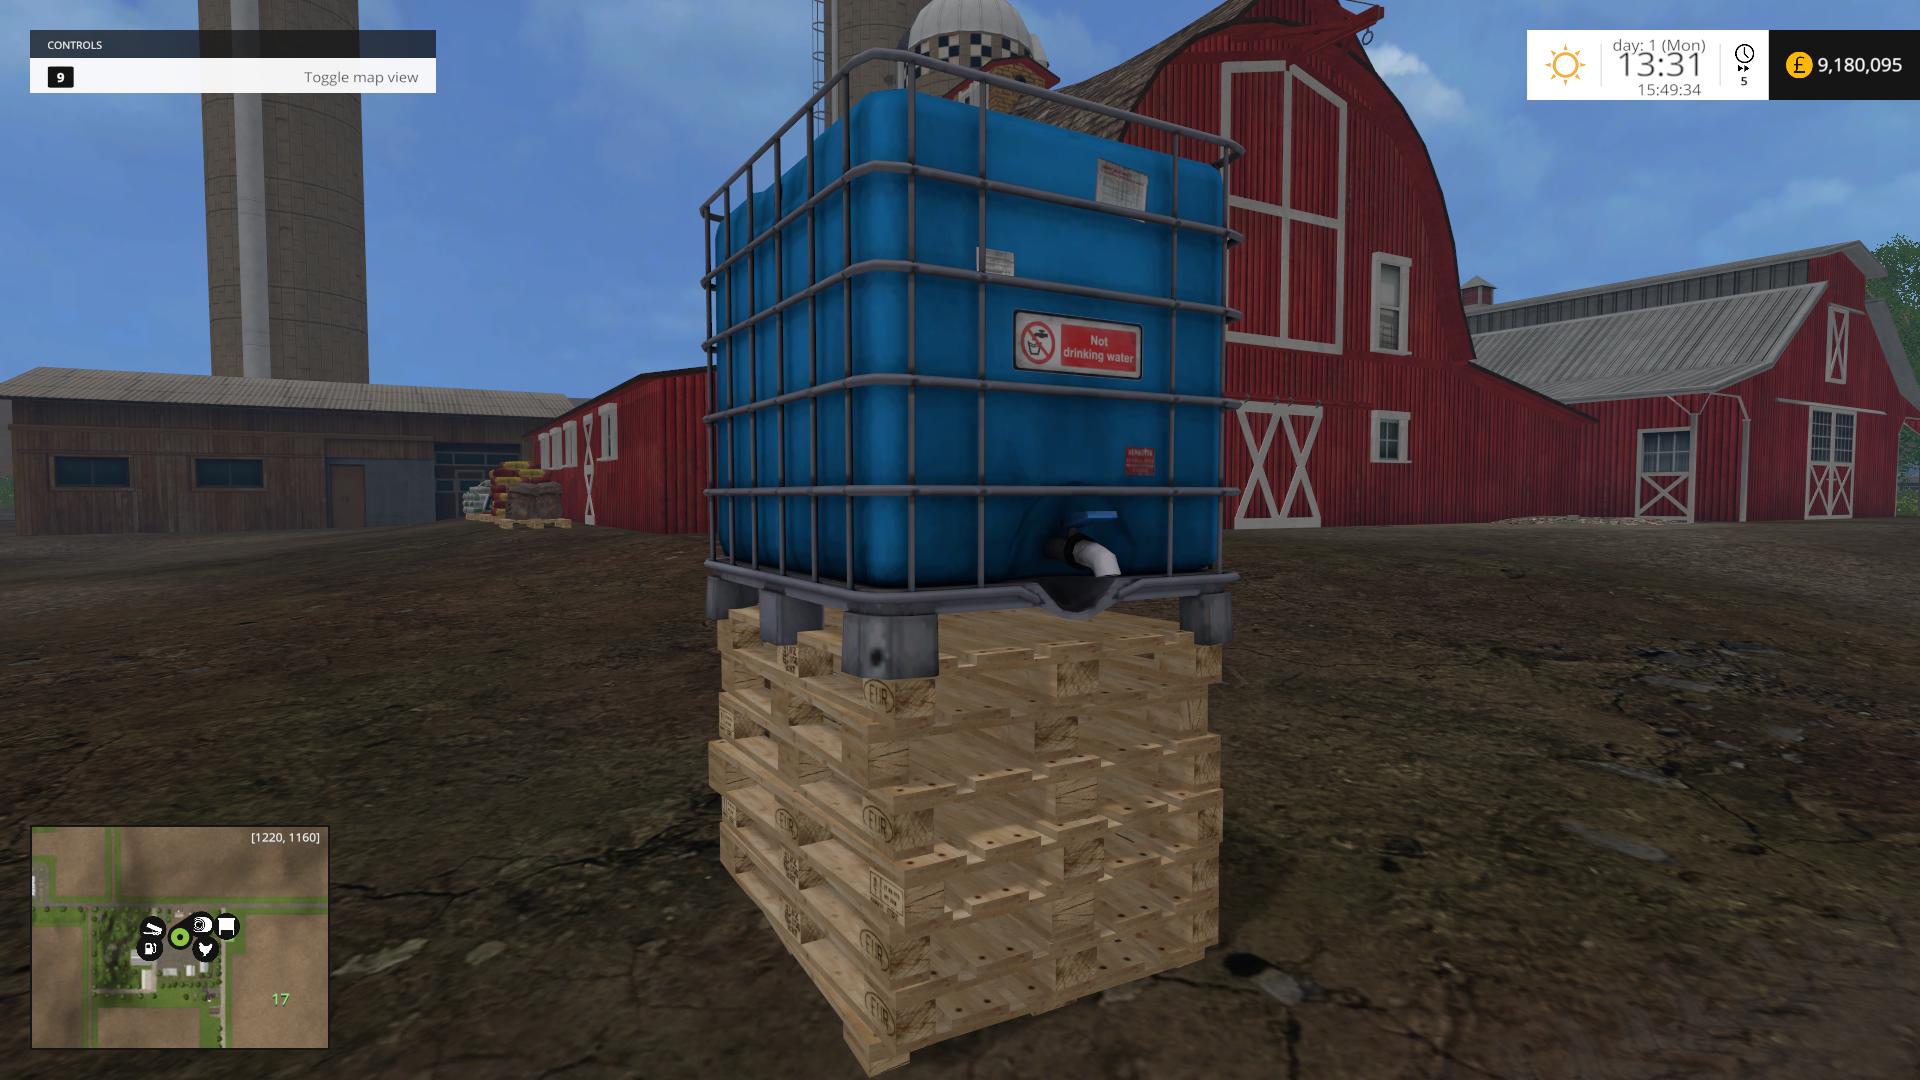 Placeable Ibc Tank With Water Trigger • Farming Simulator 19 17 22 Mods Fs19 17 22 Mods 2972